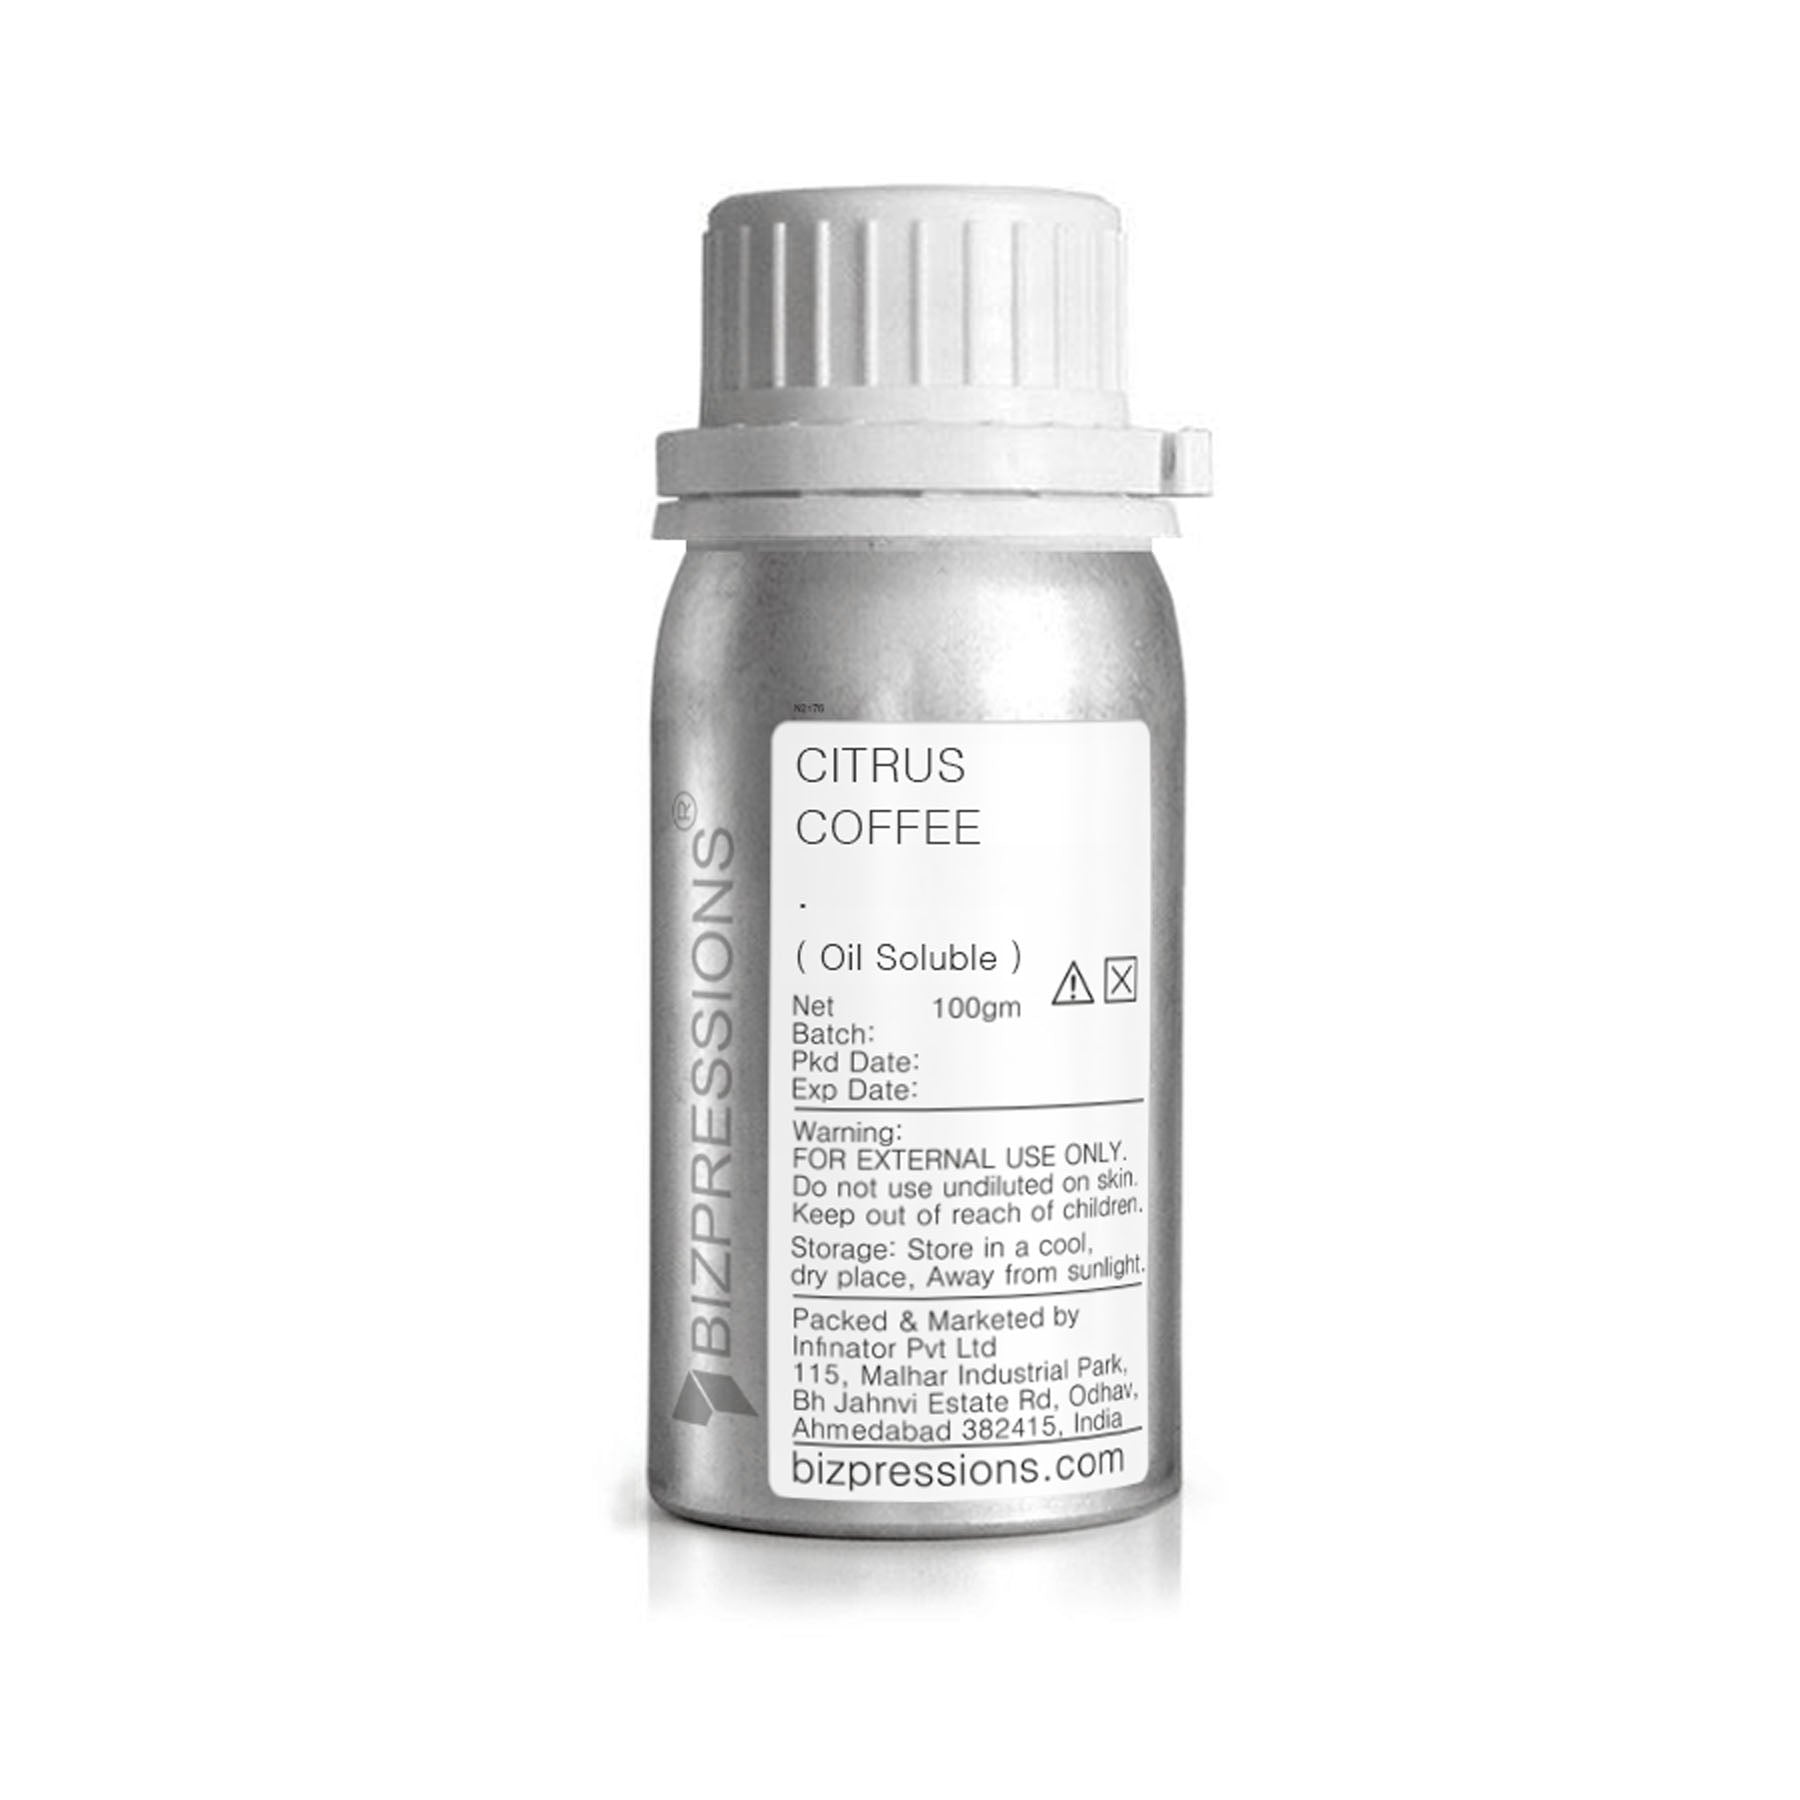 CITRUS COFFEE - Fragrance ( Oil Soluble ) - 100 gm